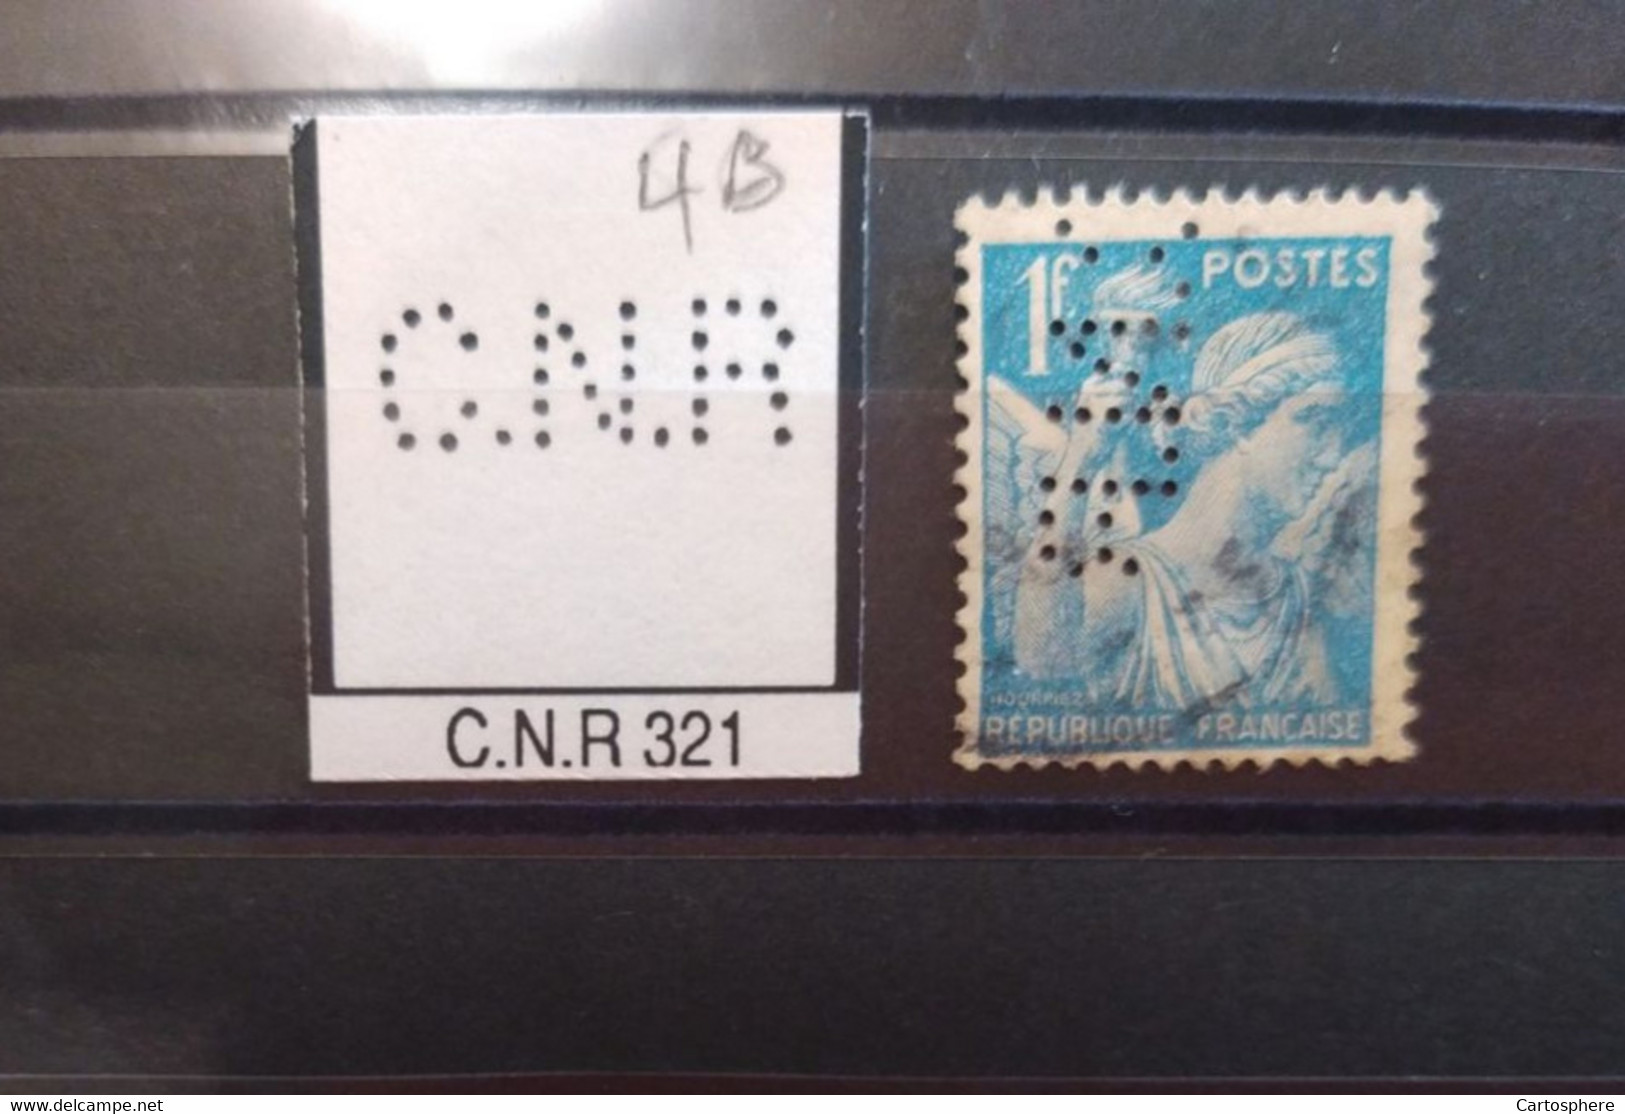 FRANCE  TIMBRE CNR 321 INDICE 3 C.N.R 221 SUR IRIS BLEU PERFORE PERFORES PERFIN PERFINS PERFO PERFORATION PERFORIERT - Used Stamps